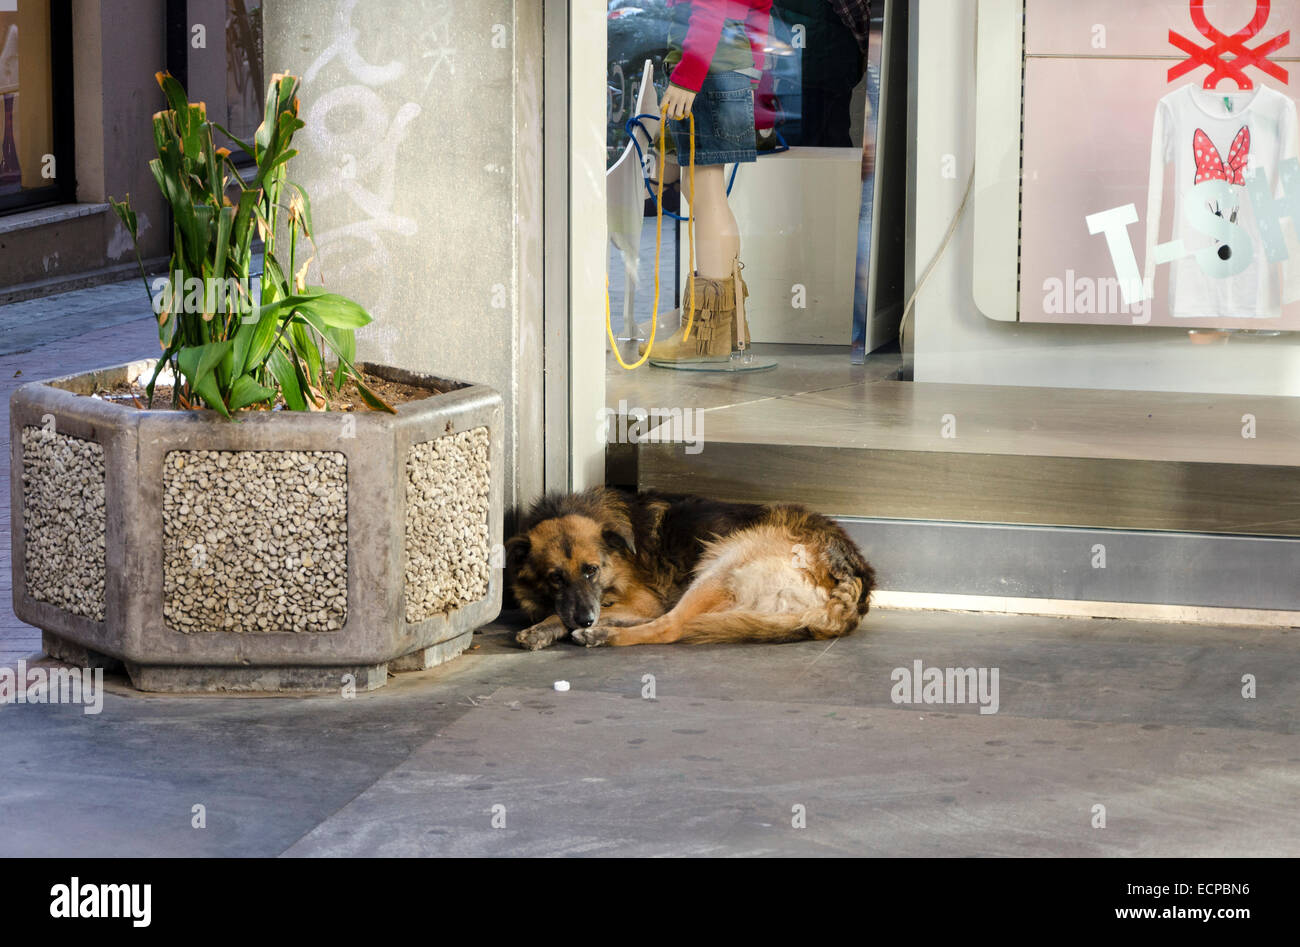 PALERMO, SICILY, ITALY - OCTOBER 3, 2012: A stray dog dozing in the commercial area of the city, on October 3, 2012 in Palermo, Stock Photo